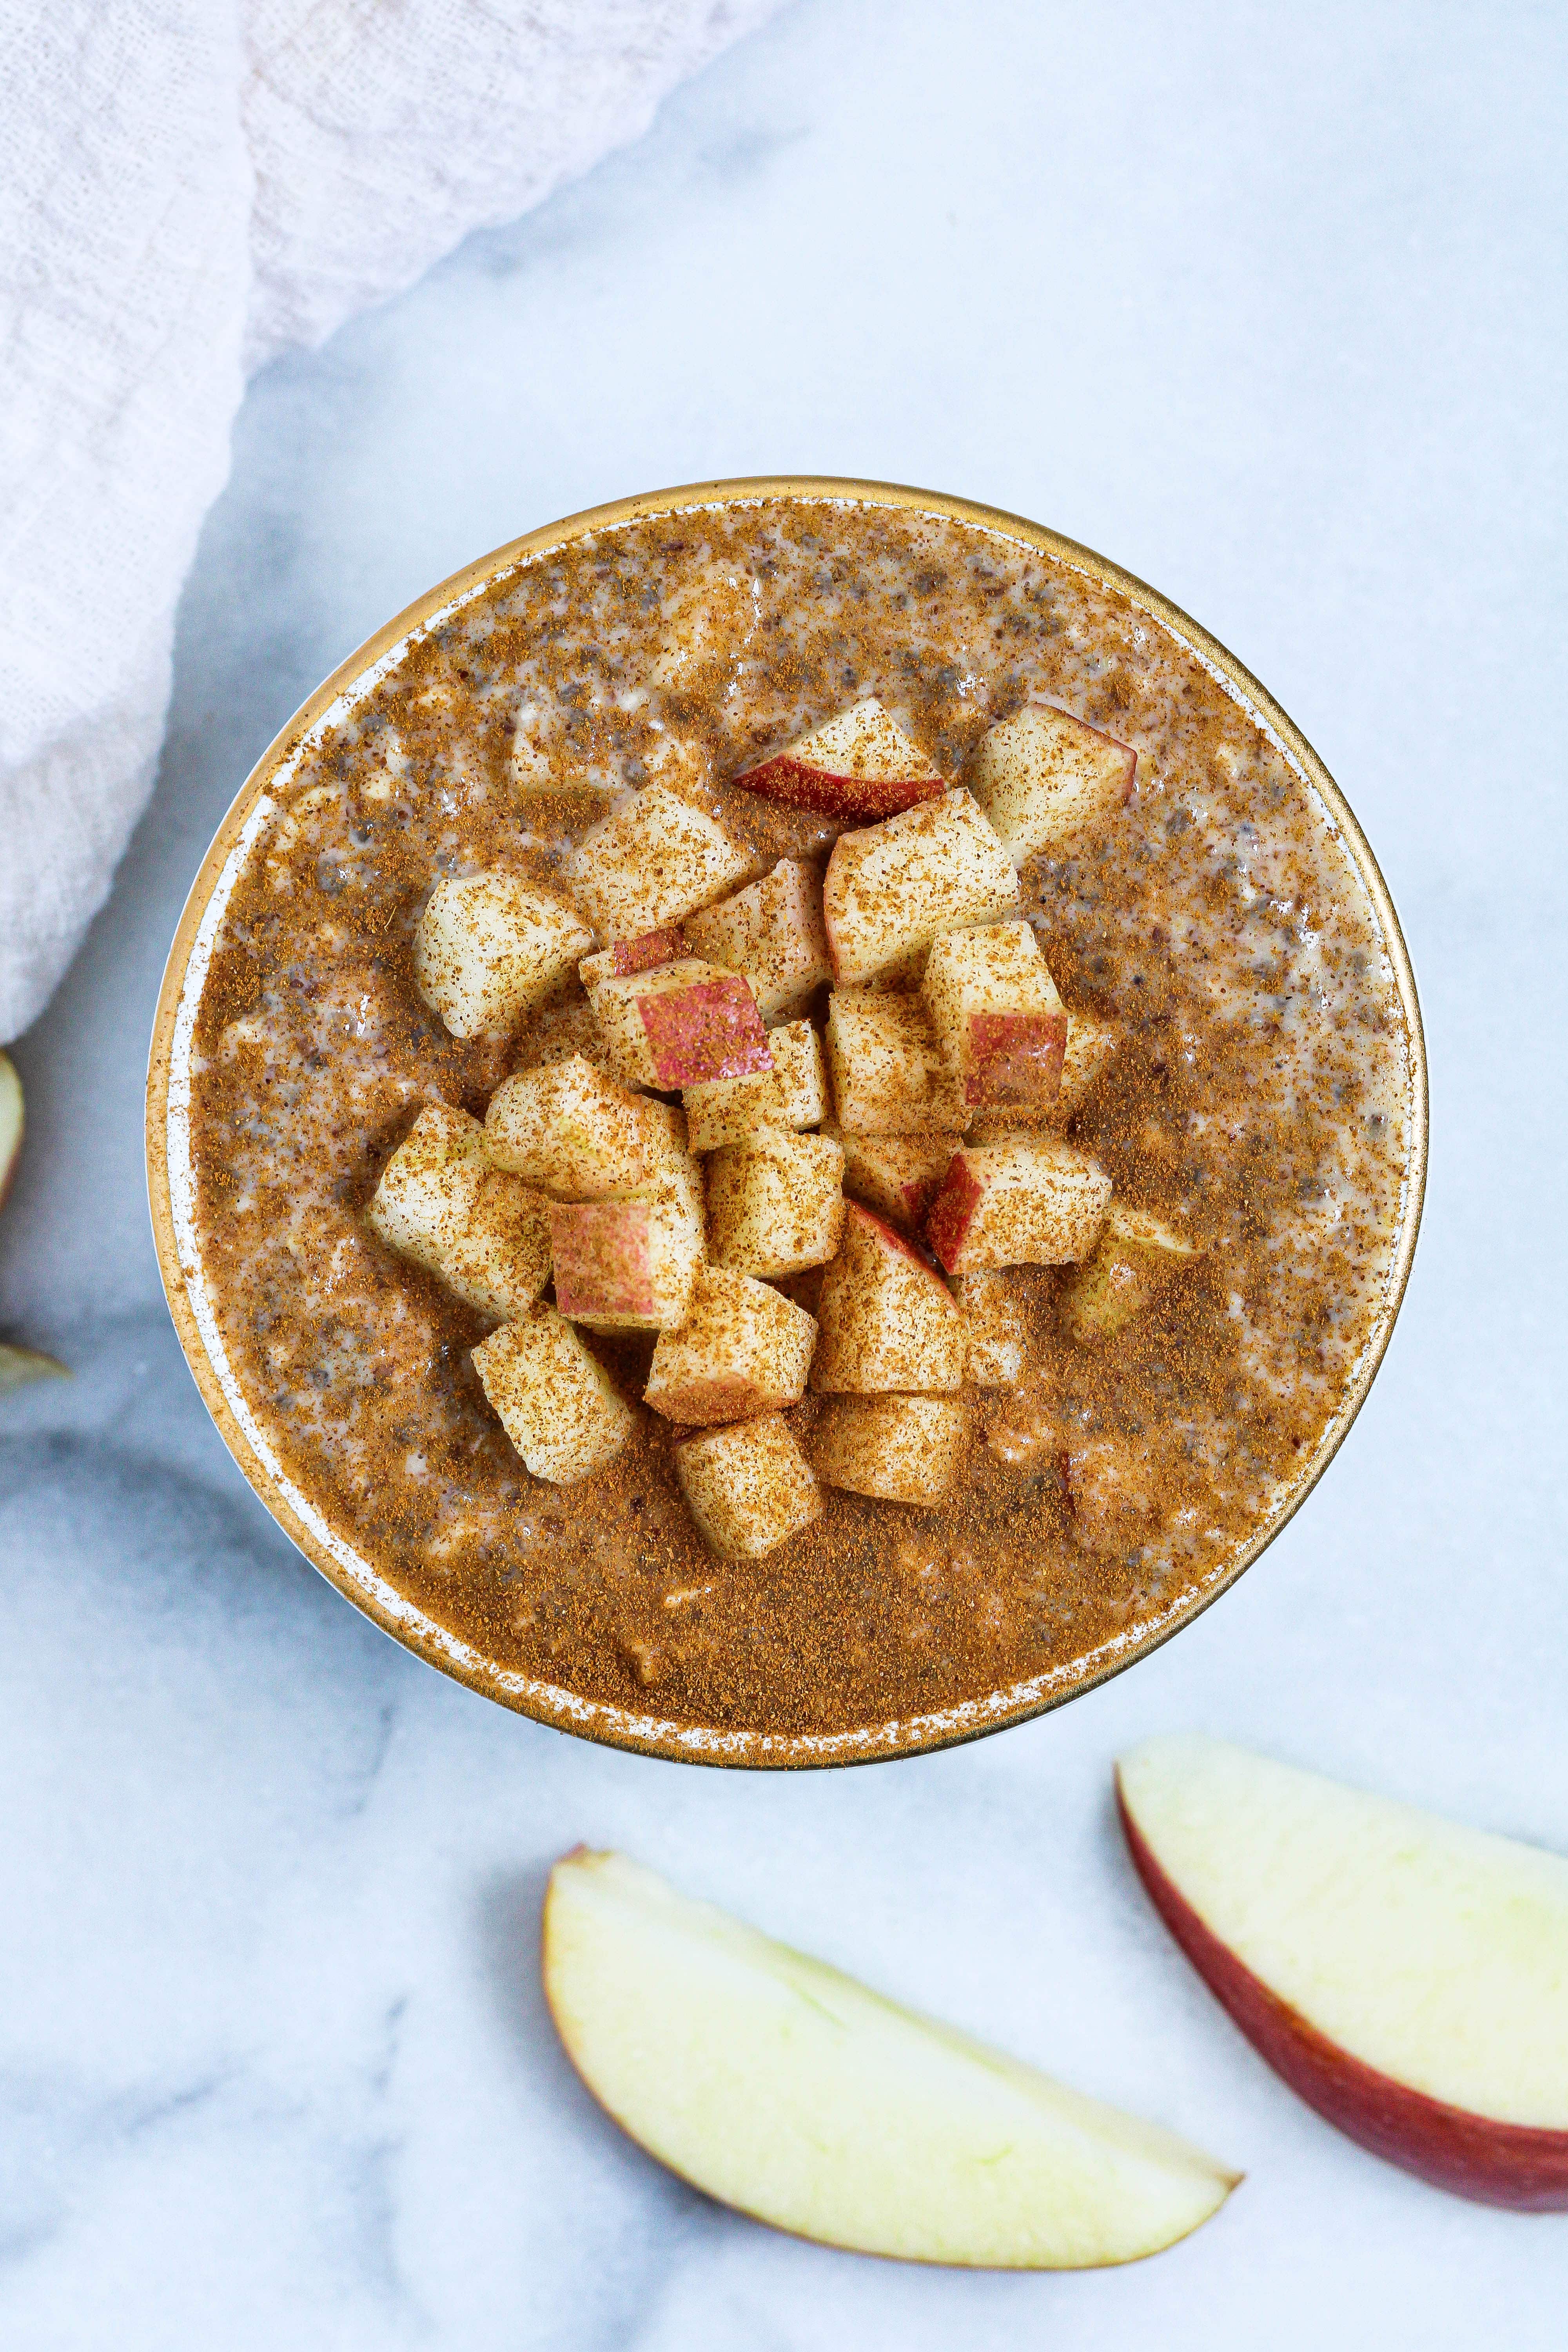 Apple Pie Overnight Oats dusted with cinnamon in a white and gold bowl